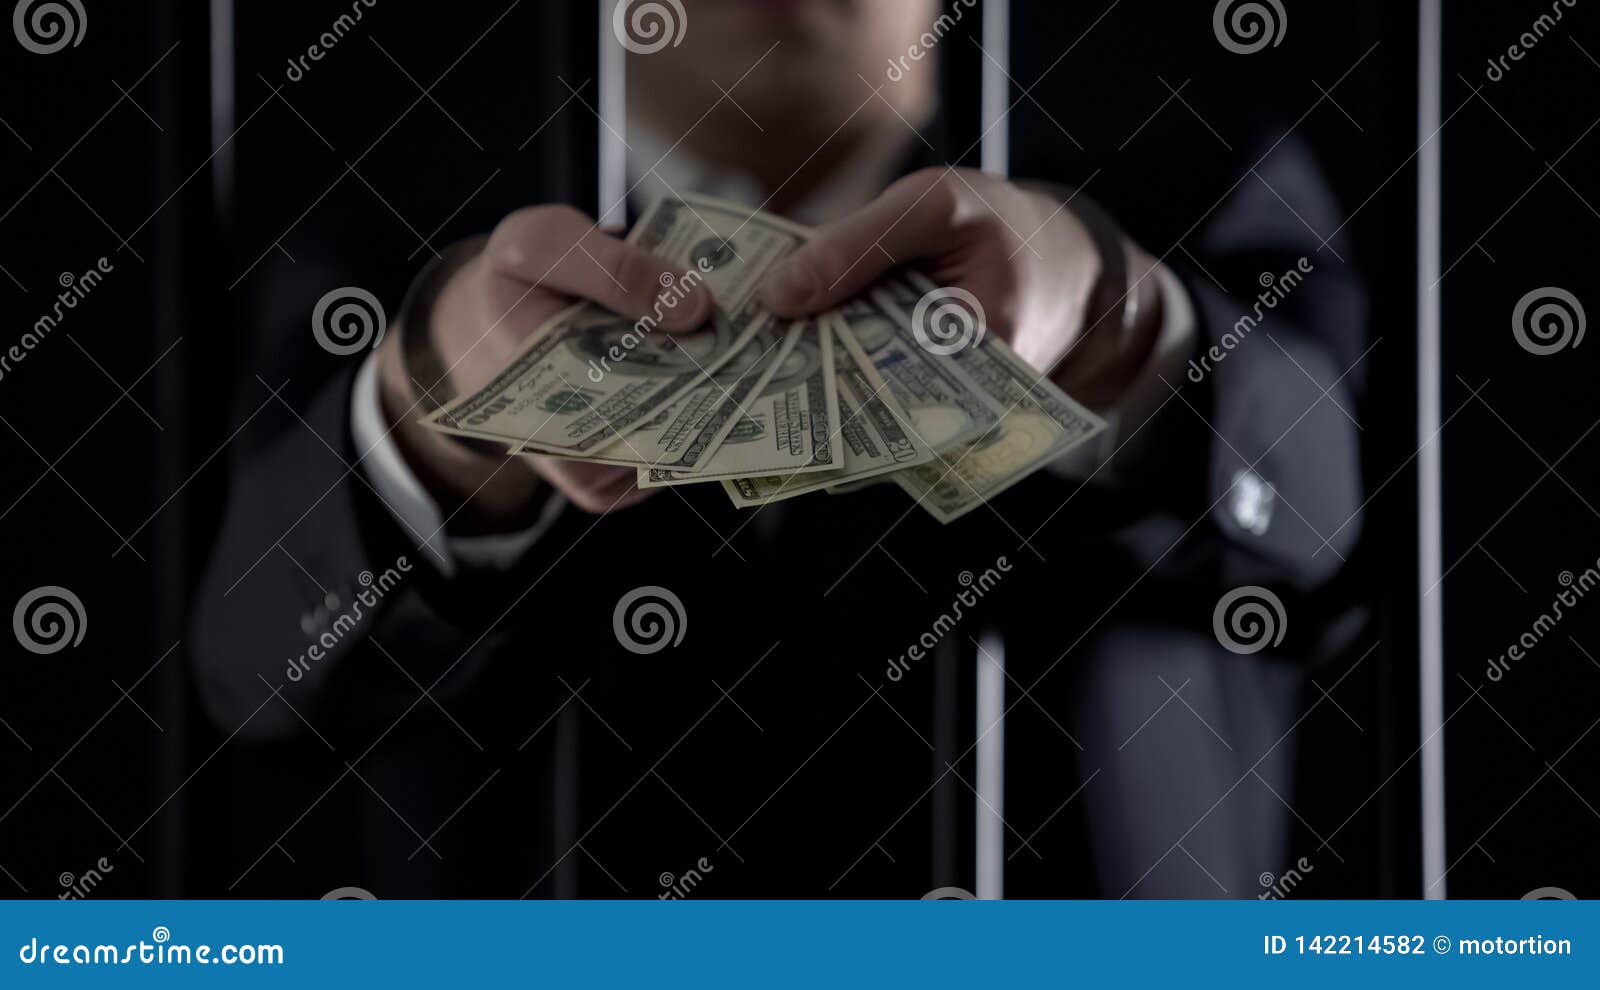 handcuffed businessman holding dollar banknotes, tax evasion, money laundering